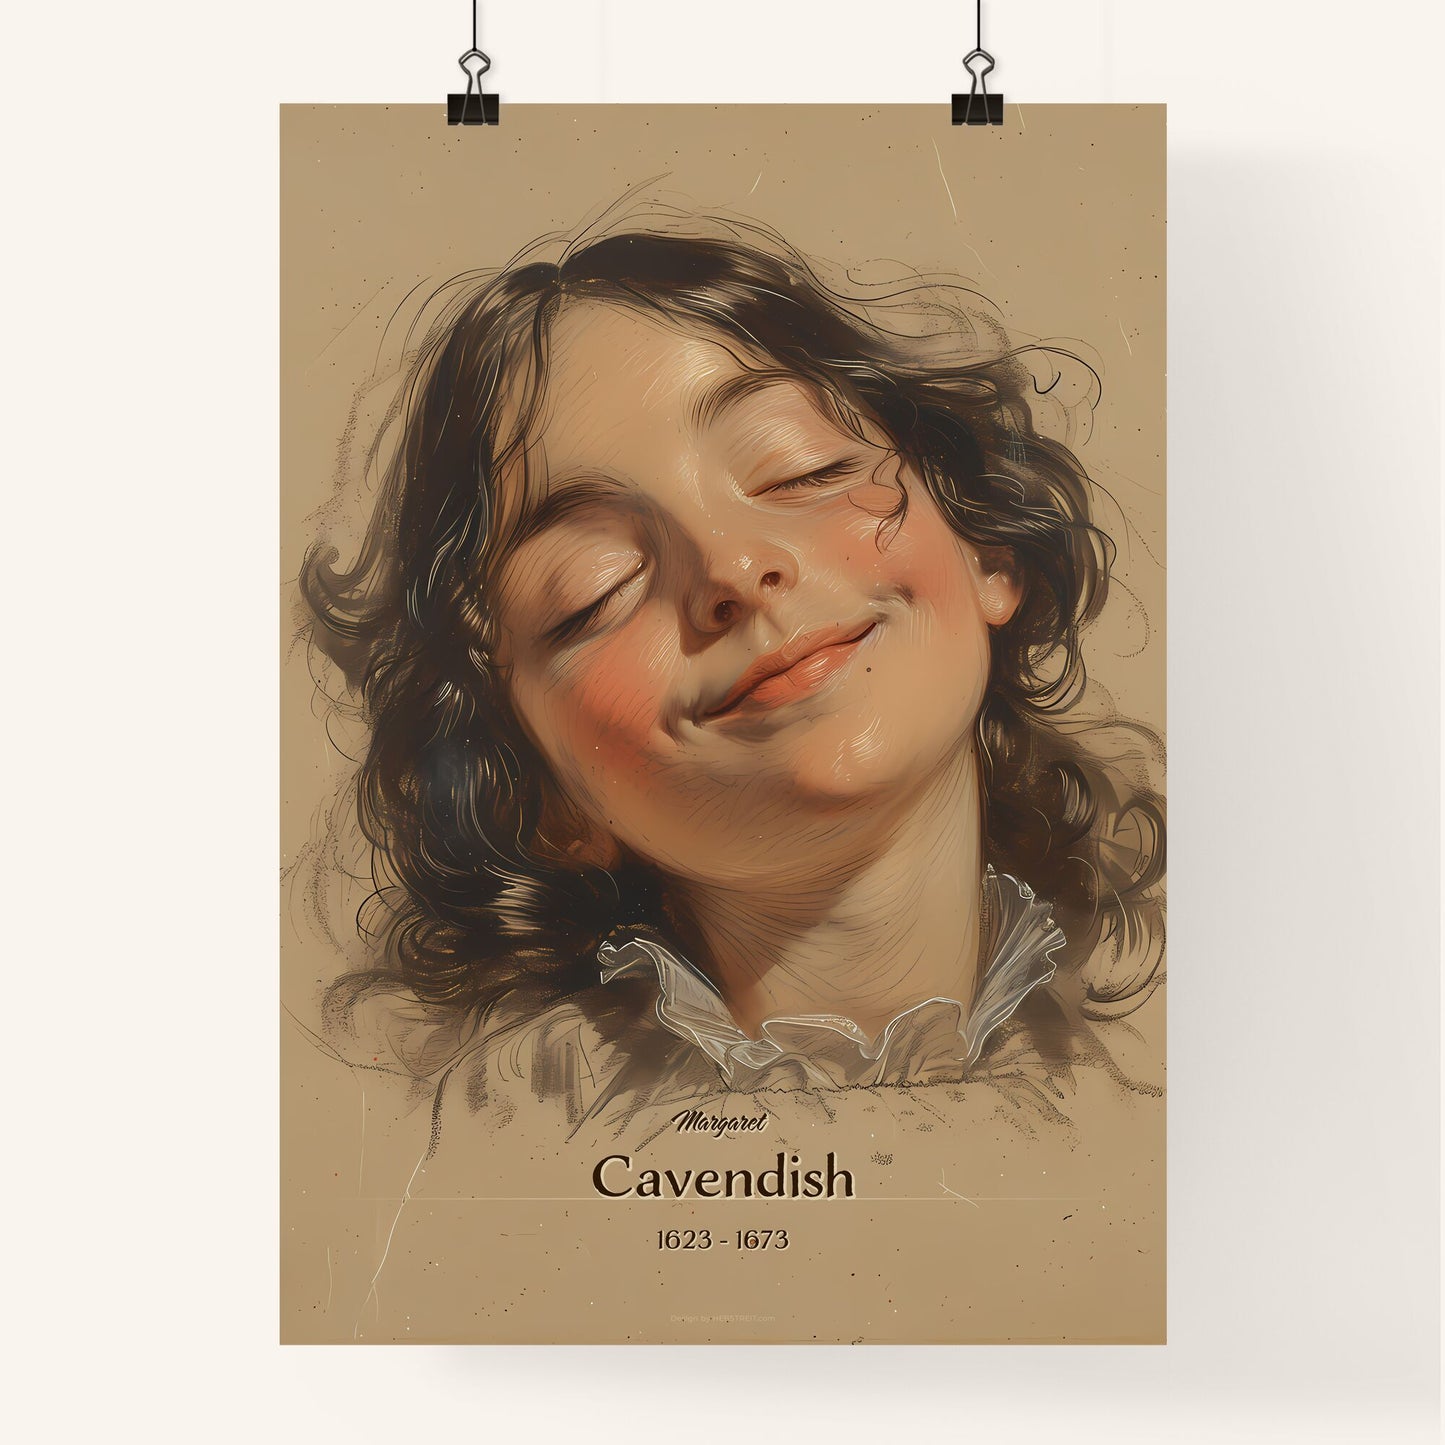 Margaret, Cavendish, 1623 - 1673, A Poster of a drawing of a woman with her eyes closed Default Title